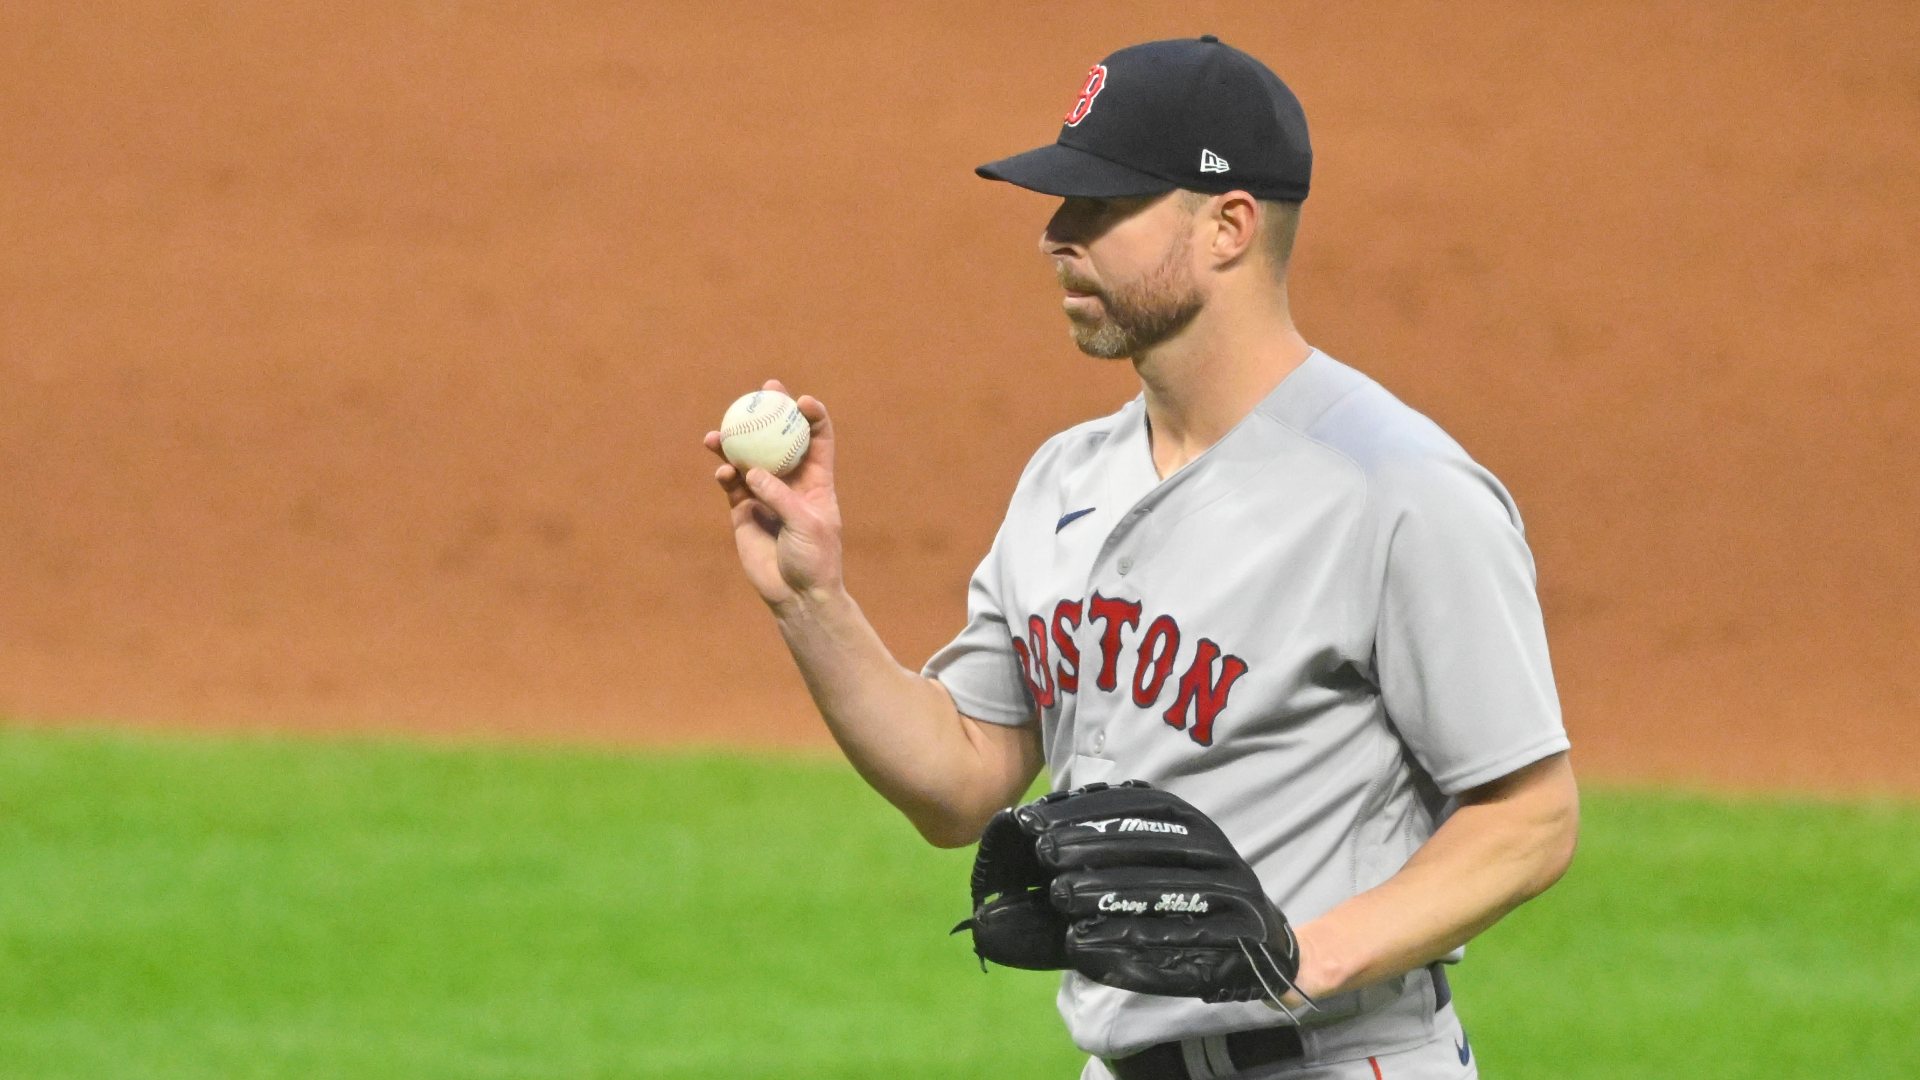 Corey Kluber - MLB Starting pitcher - News, Stats, Bio and more - The  Athletic